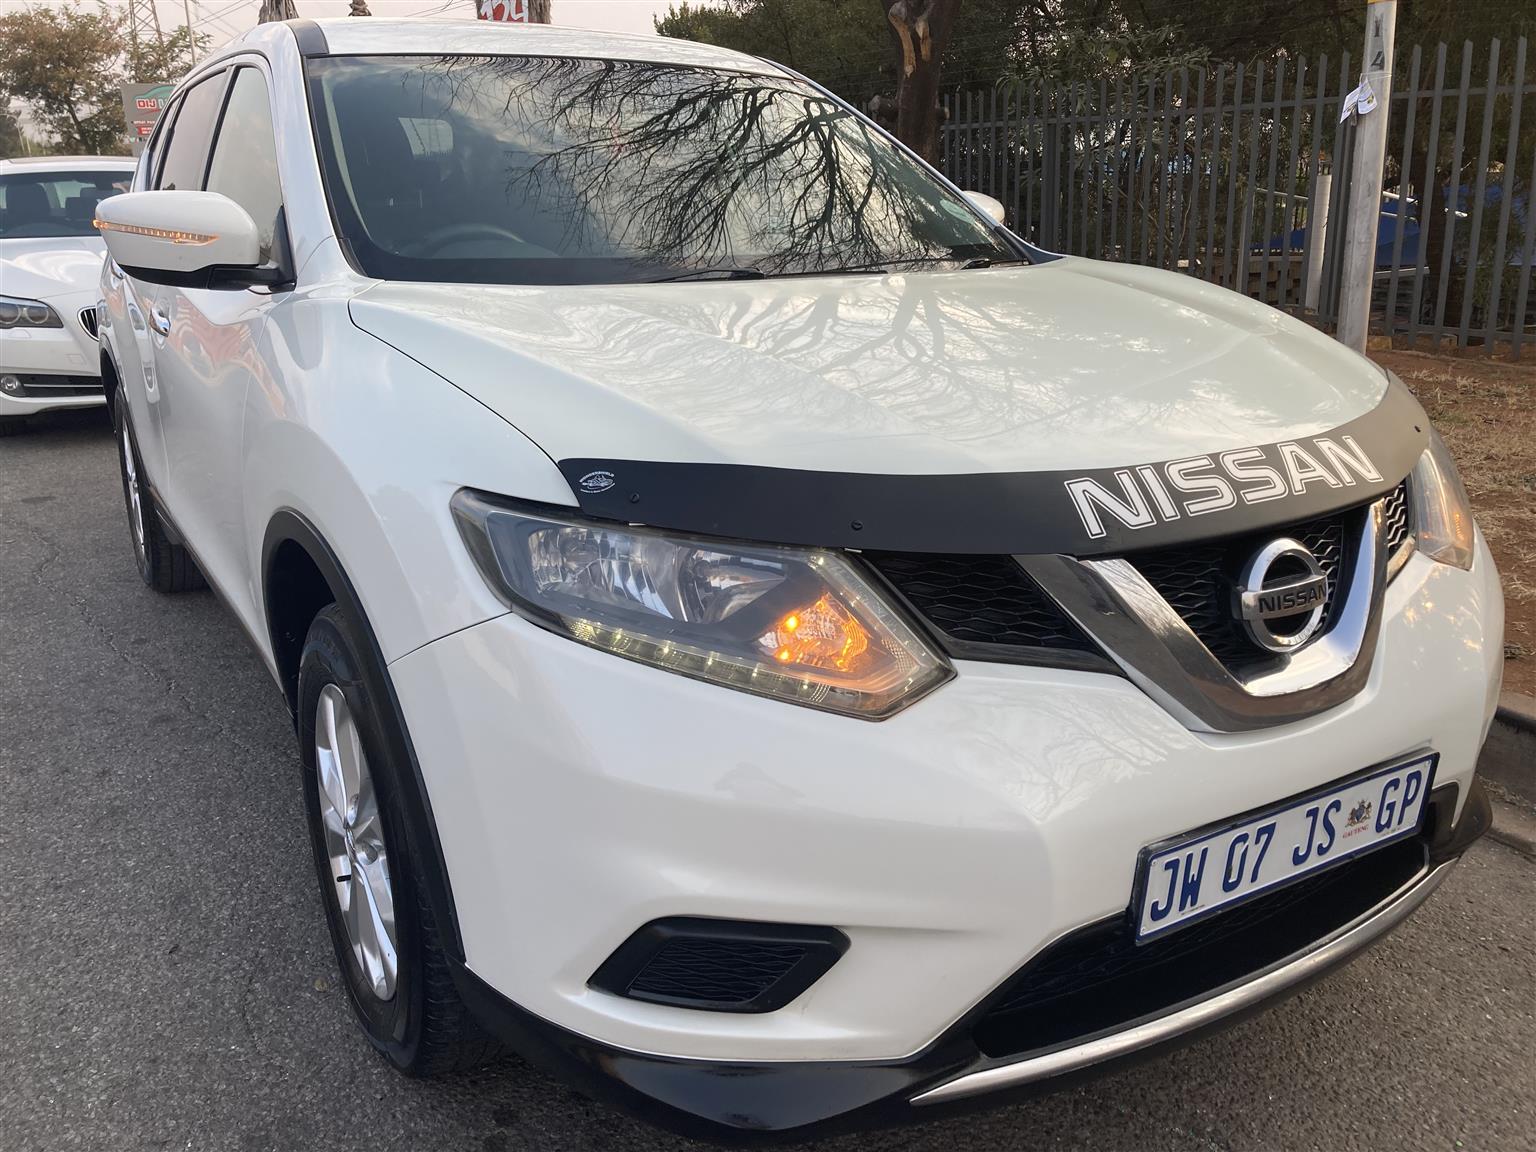 2015 Nissan X-Trail 1.6 DCi Manual for sale, urgent private sale, 7 seatet